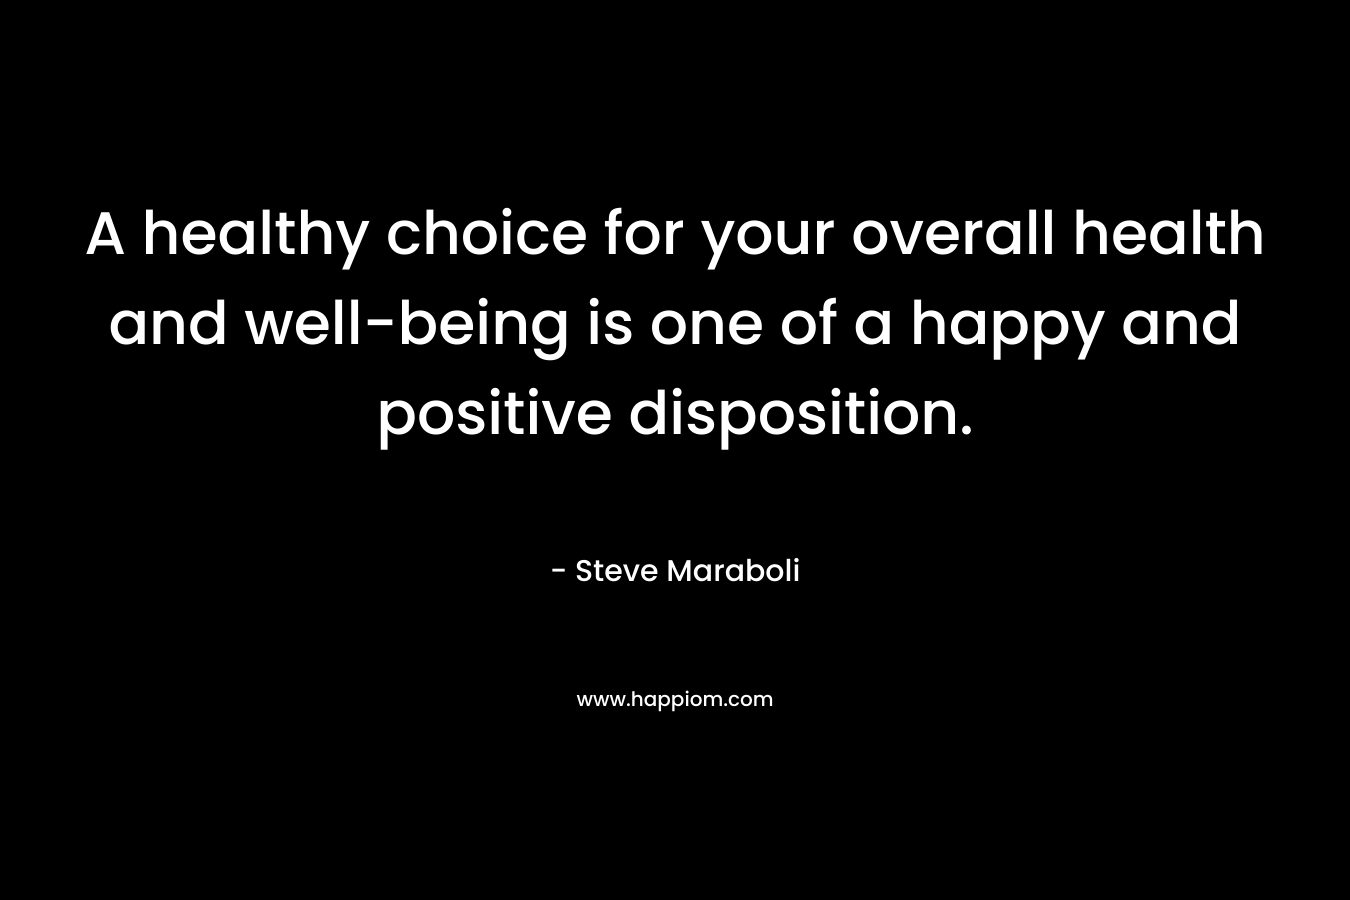 A healthy choice for your overall health and well-being is one of a happy and positive disposition.